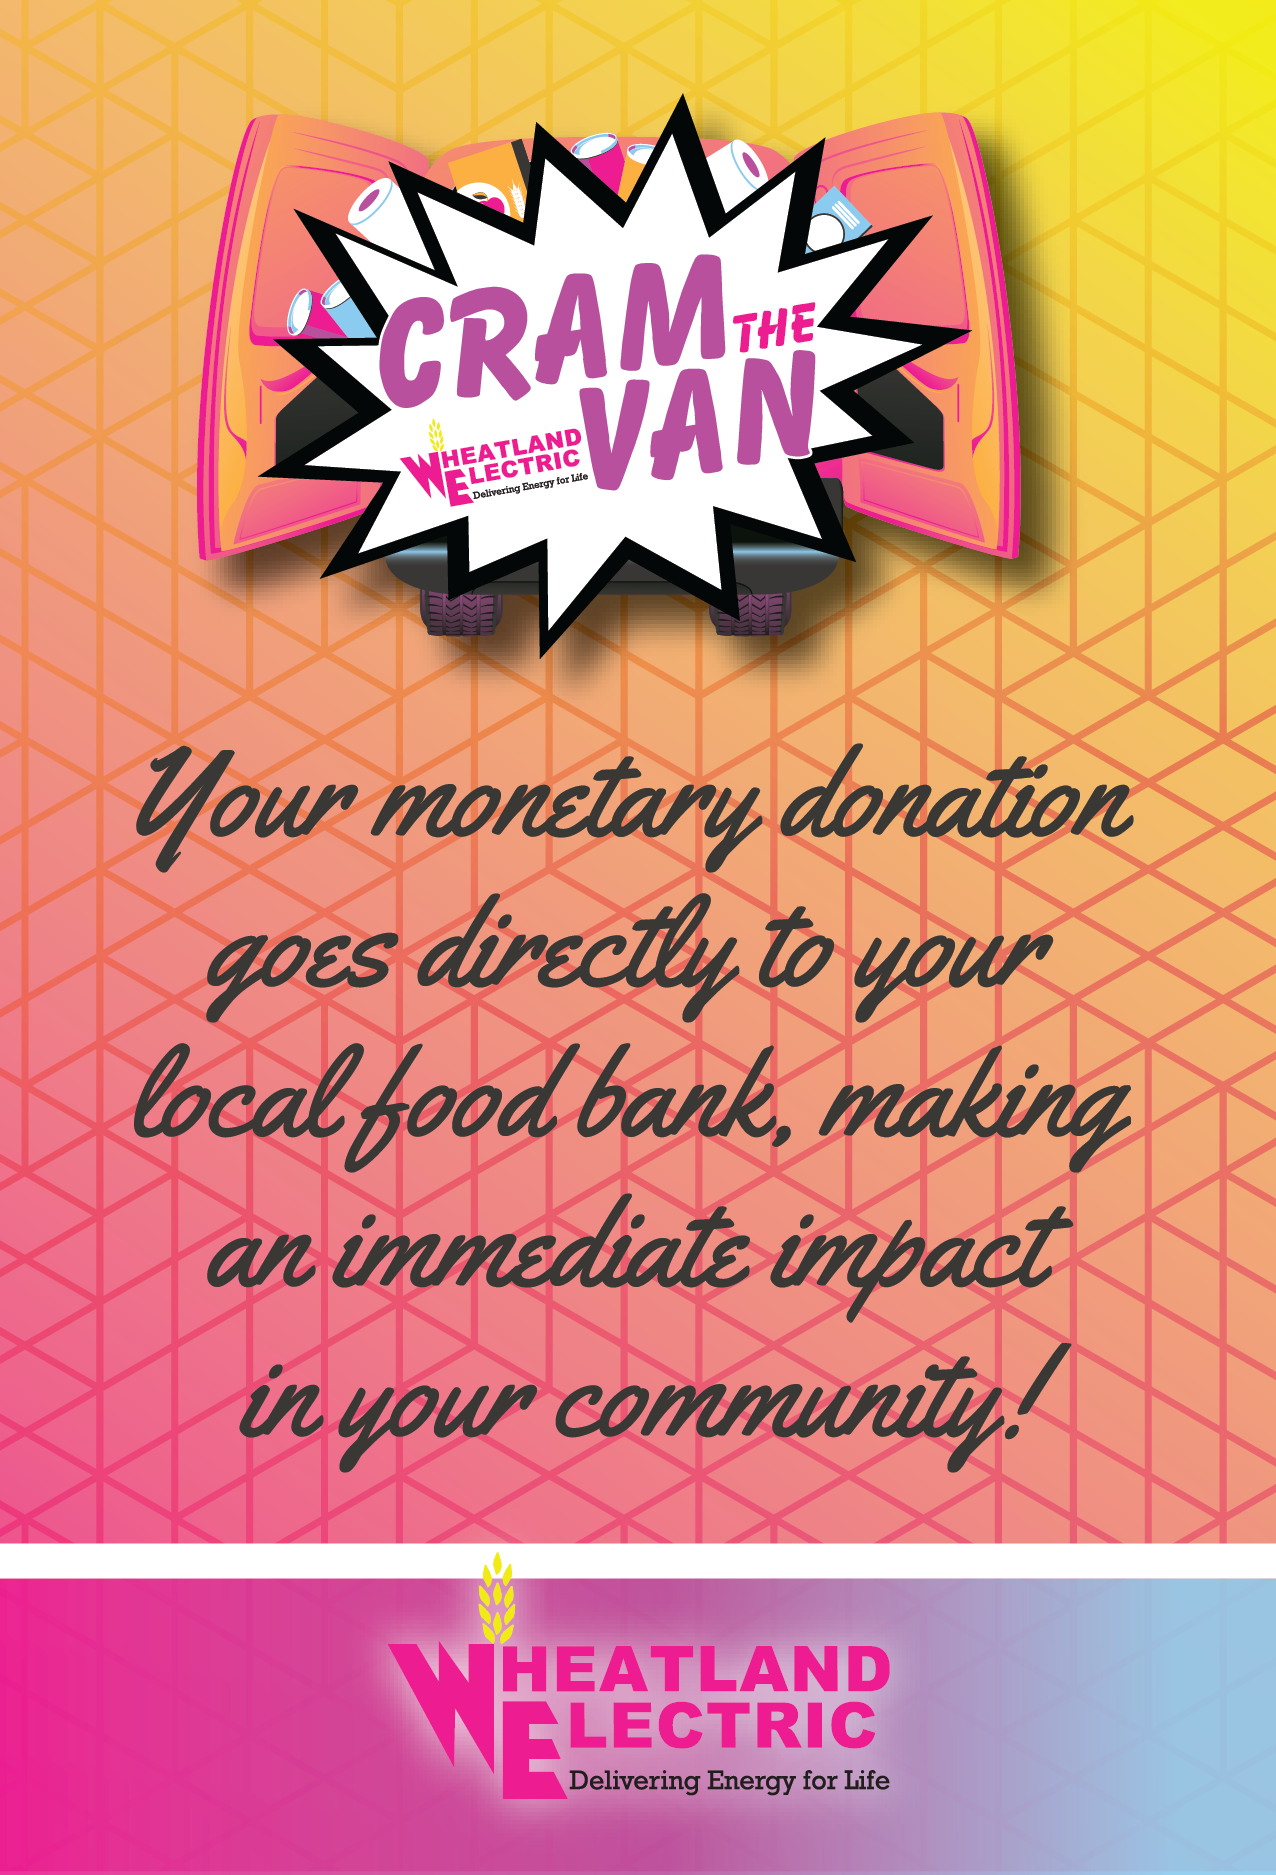 Donate Now to Your Local Food Bank